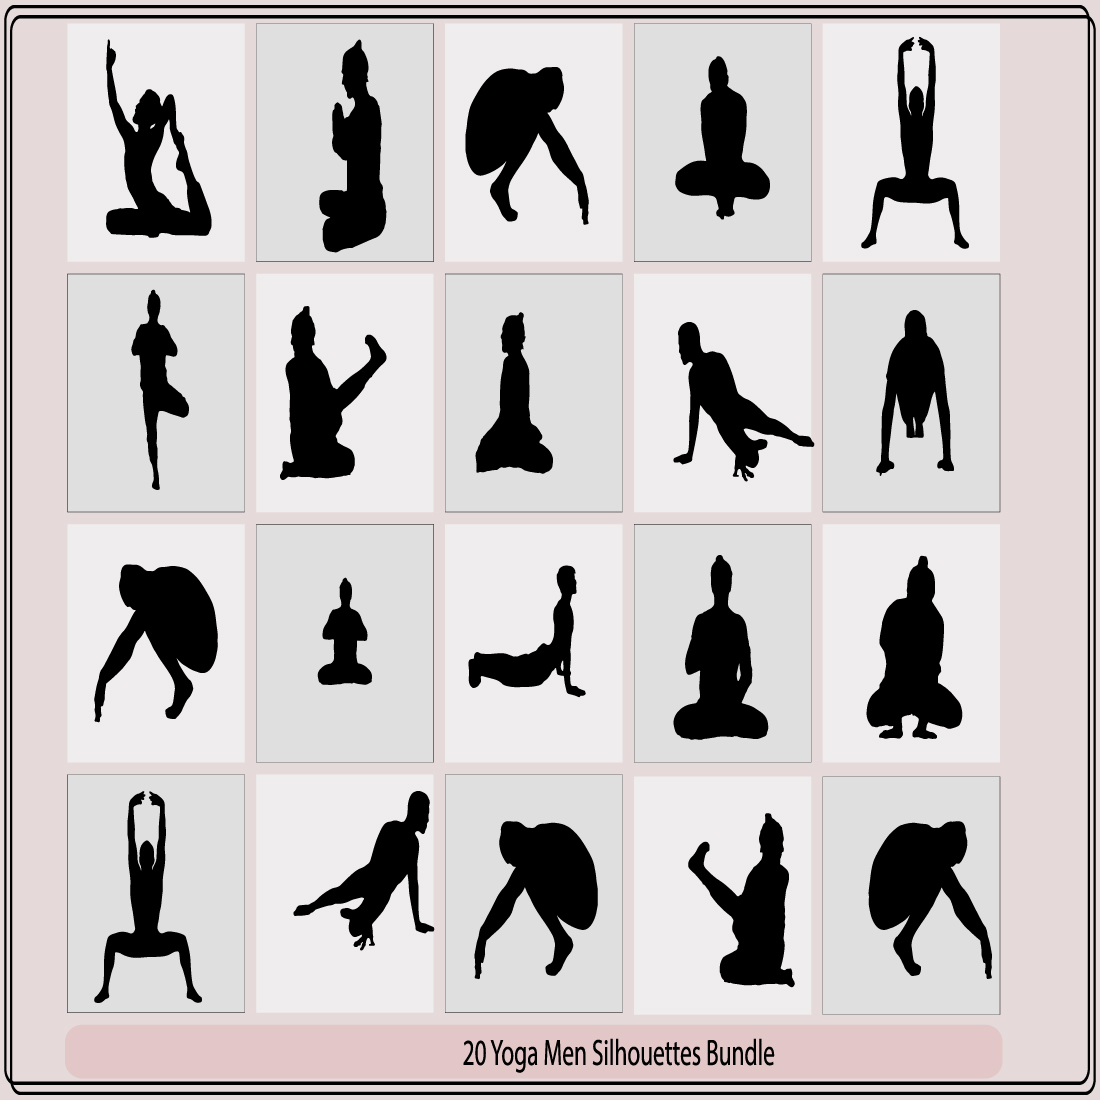 Yoga poses silhouettes body pose female Royalty Free Vector